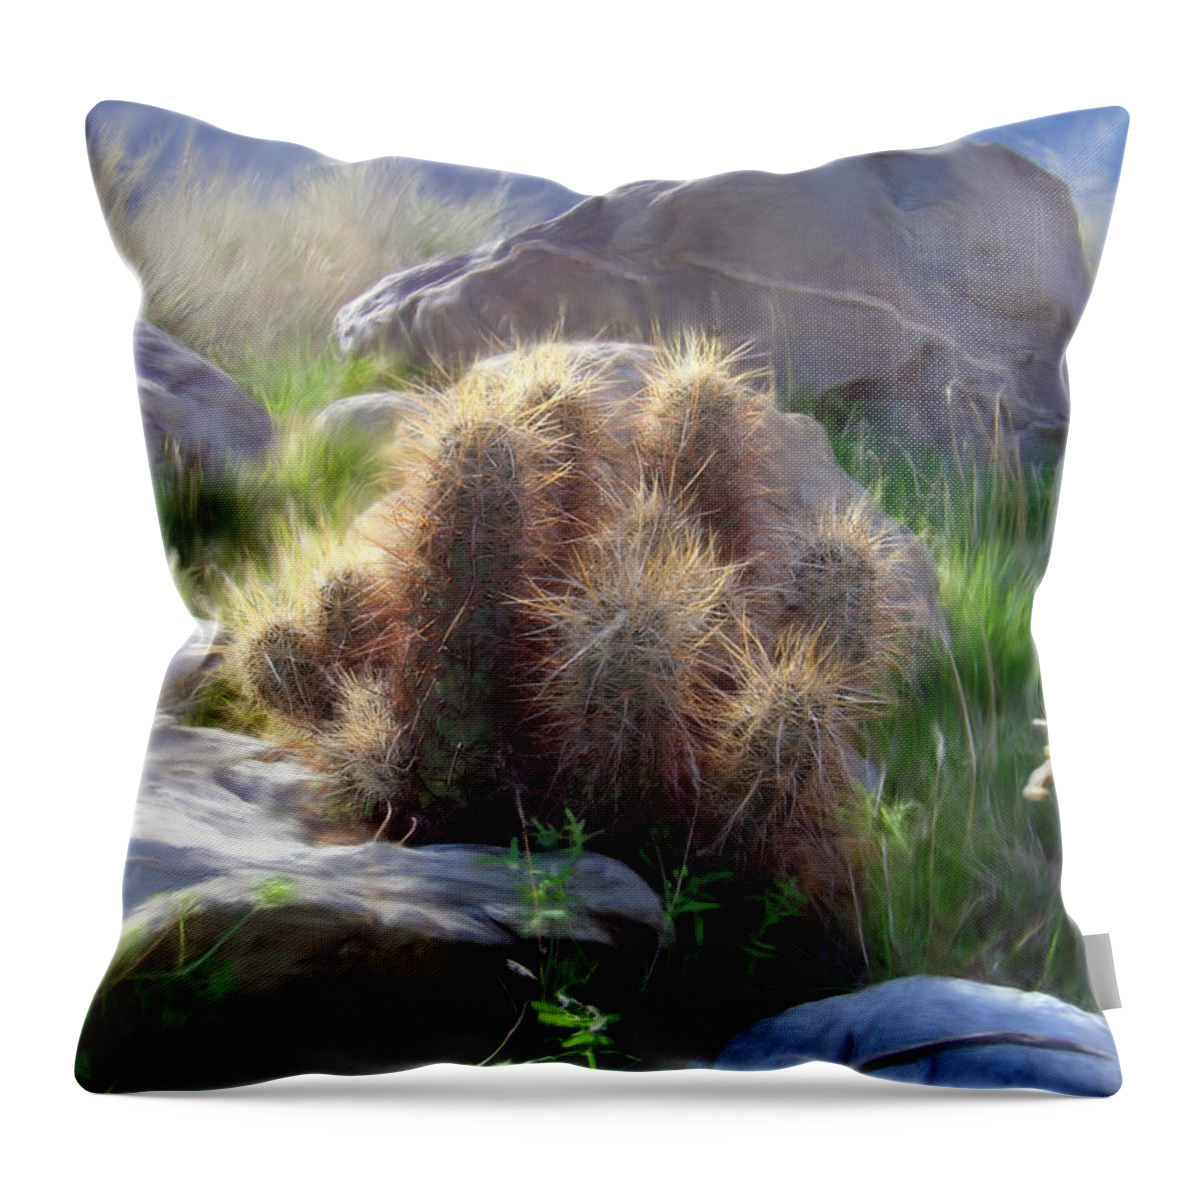 Mixed Media Throw Pillow featuring the painting Soft and Sharp by Snake Jagger